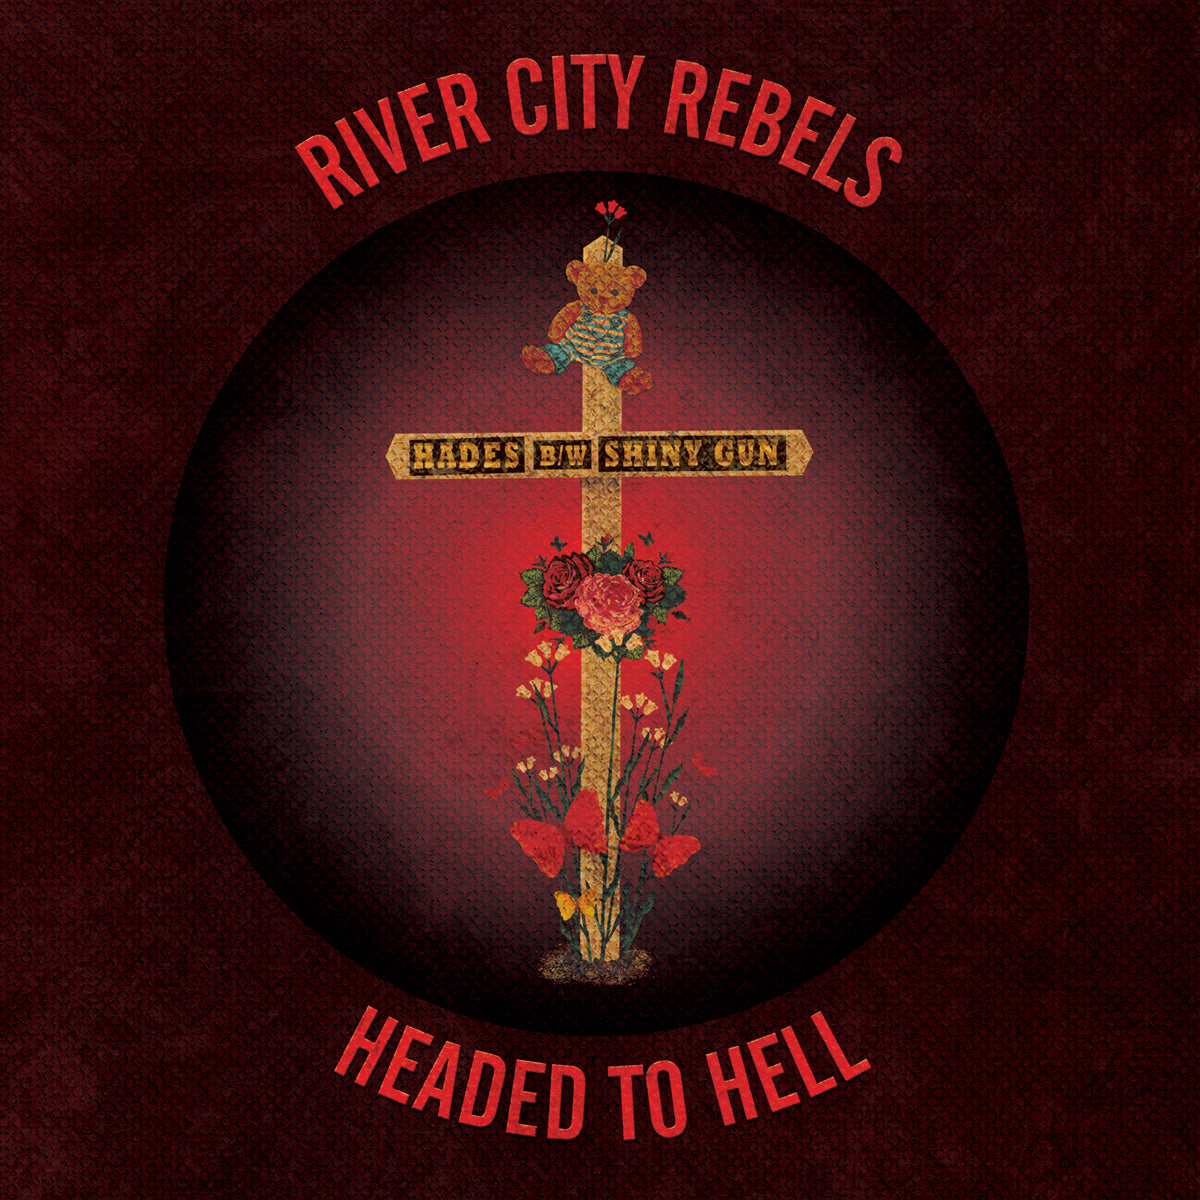 River City Rebels- Headed To Hell 7" ~RARE MAGENTA RED WAX W/ RIVER CITY REBELS STICKER!